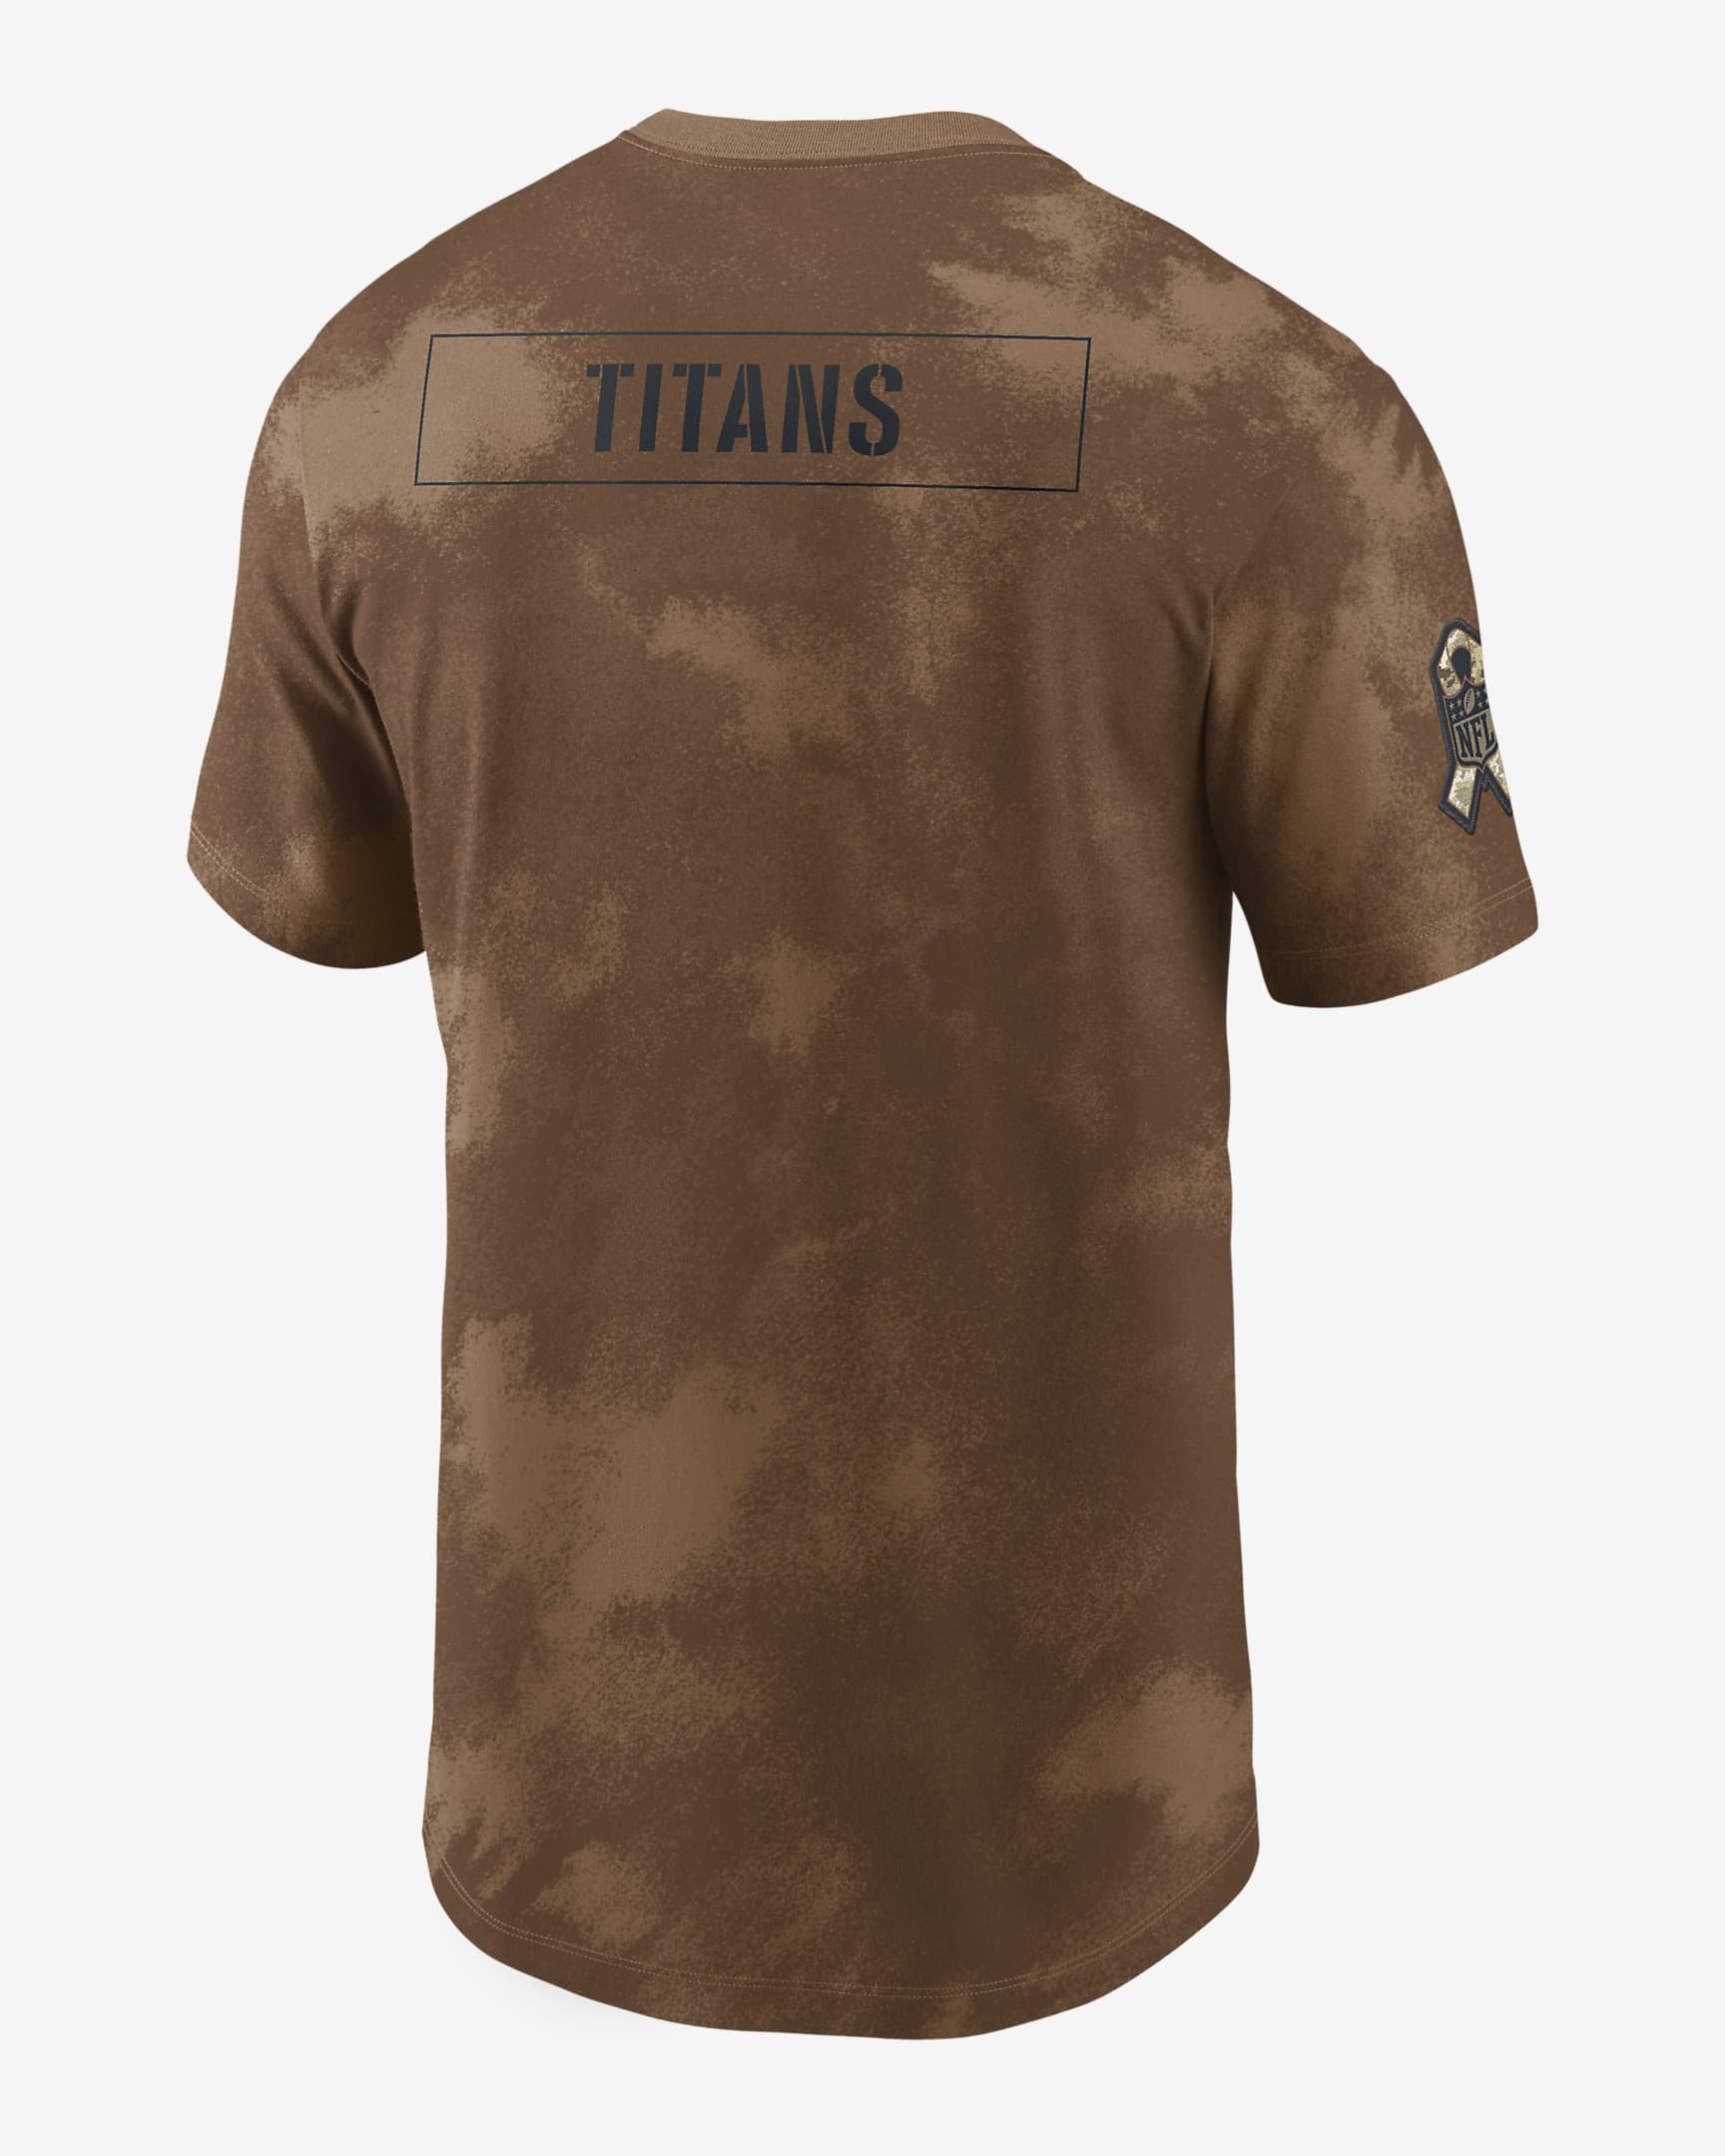 Tennessee Titans Salute to Service Sideline Men's Nike NFL T-Shirt ...